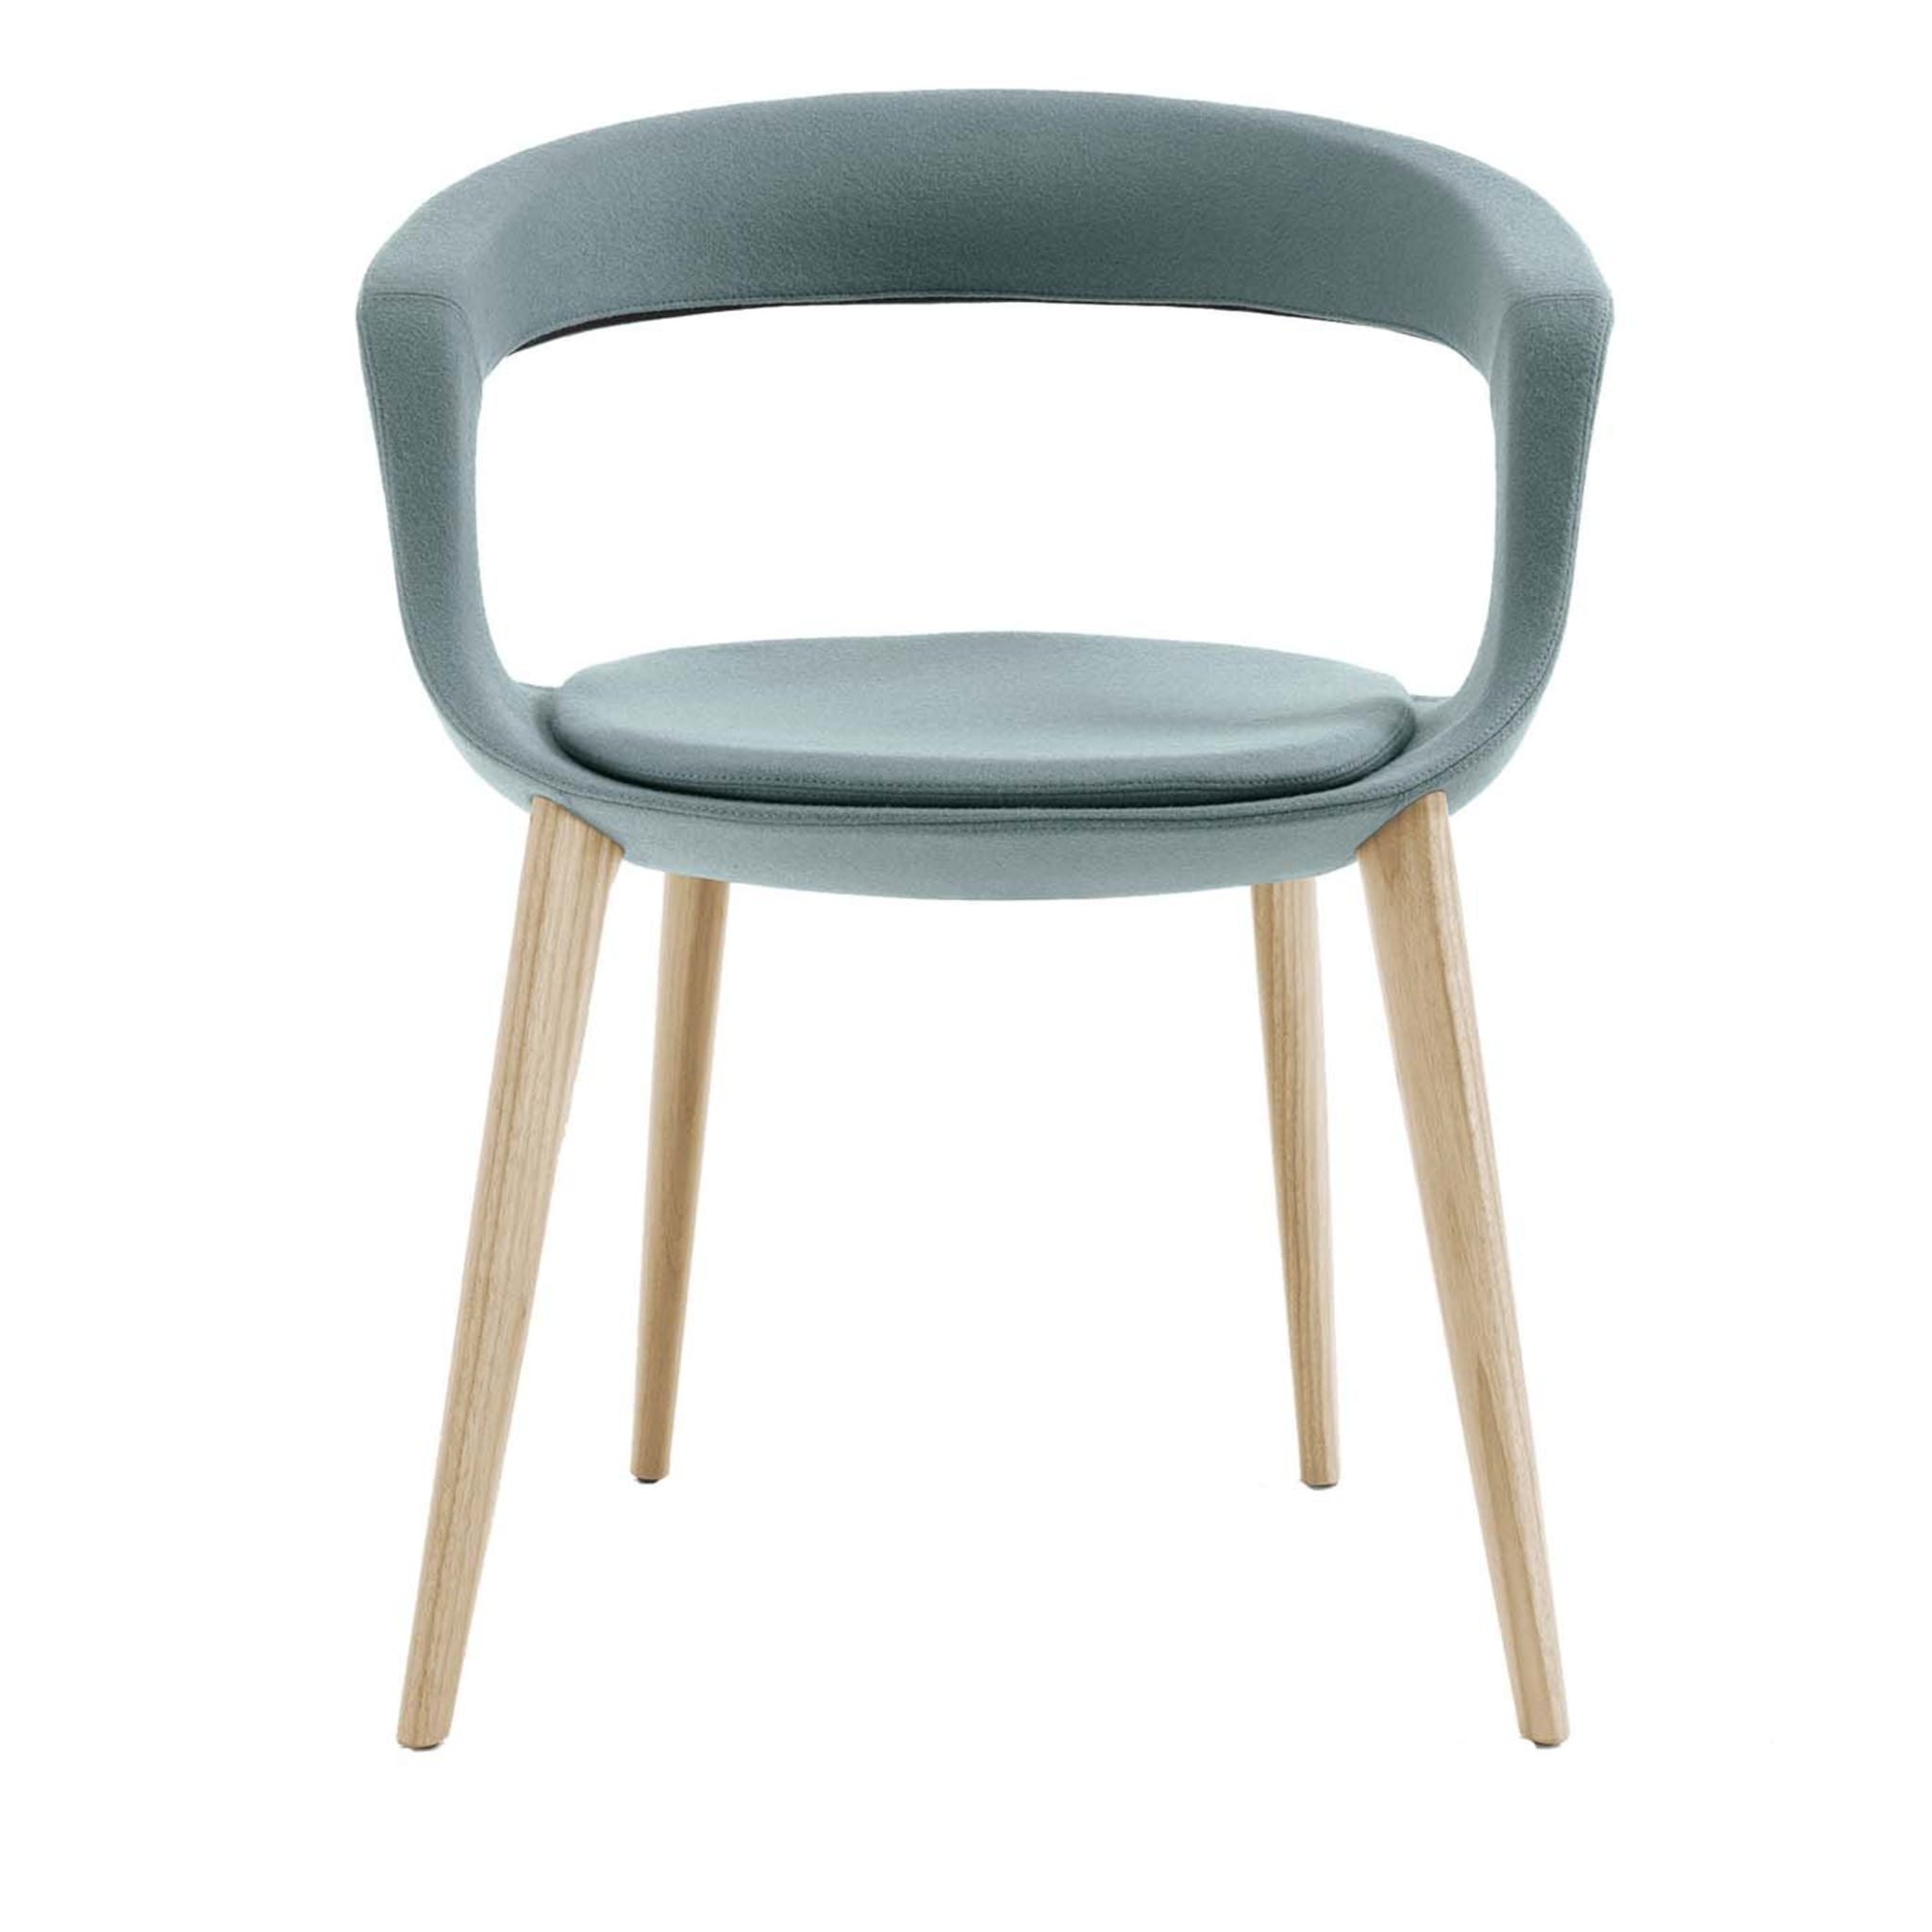 Frenchkiss Low-Backed Wooden-Legged Chair by Stefano Bigi - Main view